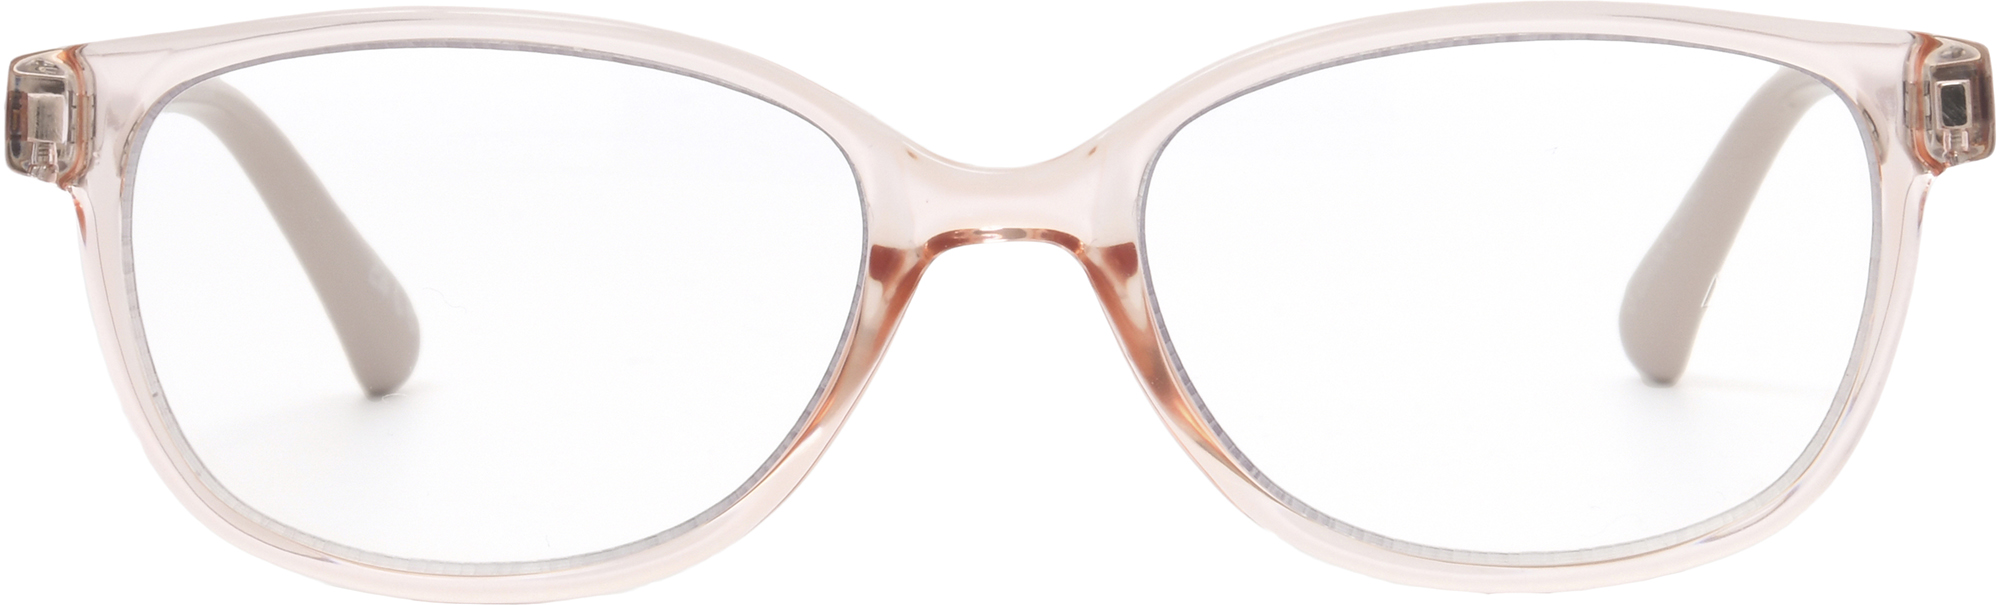 Women's Square Reading Glasses In Clear Rose By Foster Grant - Alicia - +1.25